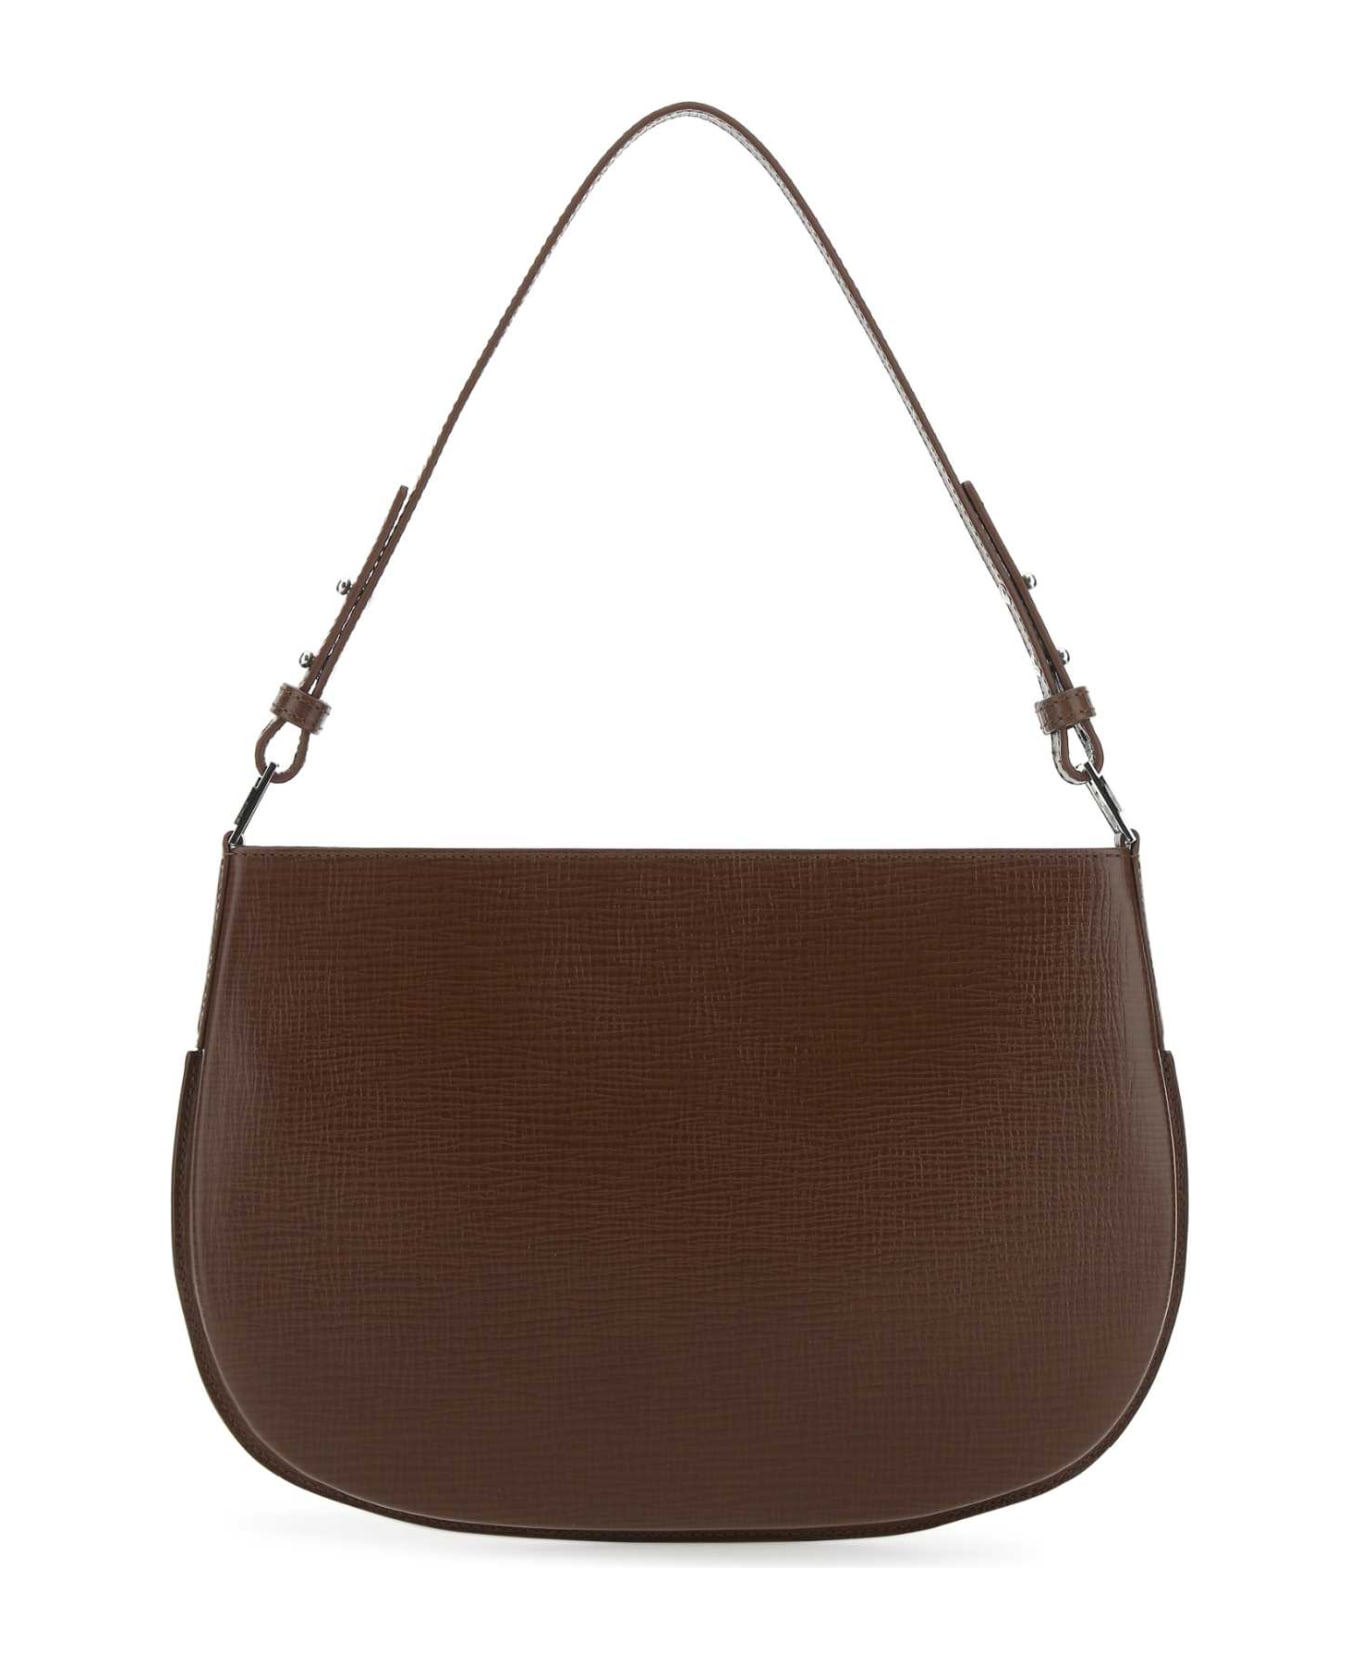 BY FAR Brown Leather Issa Shoulder Bag - TABAC トートバッグ